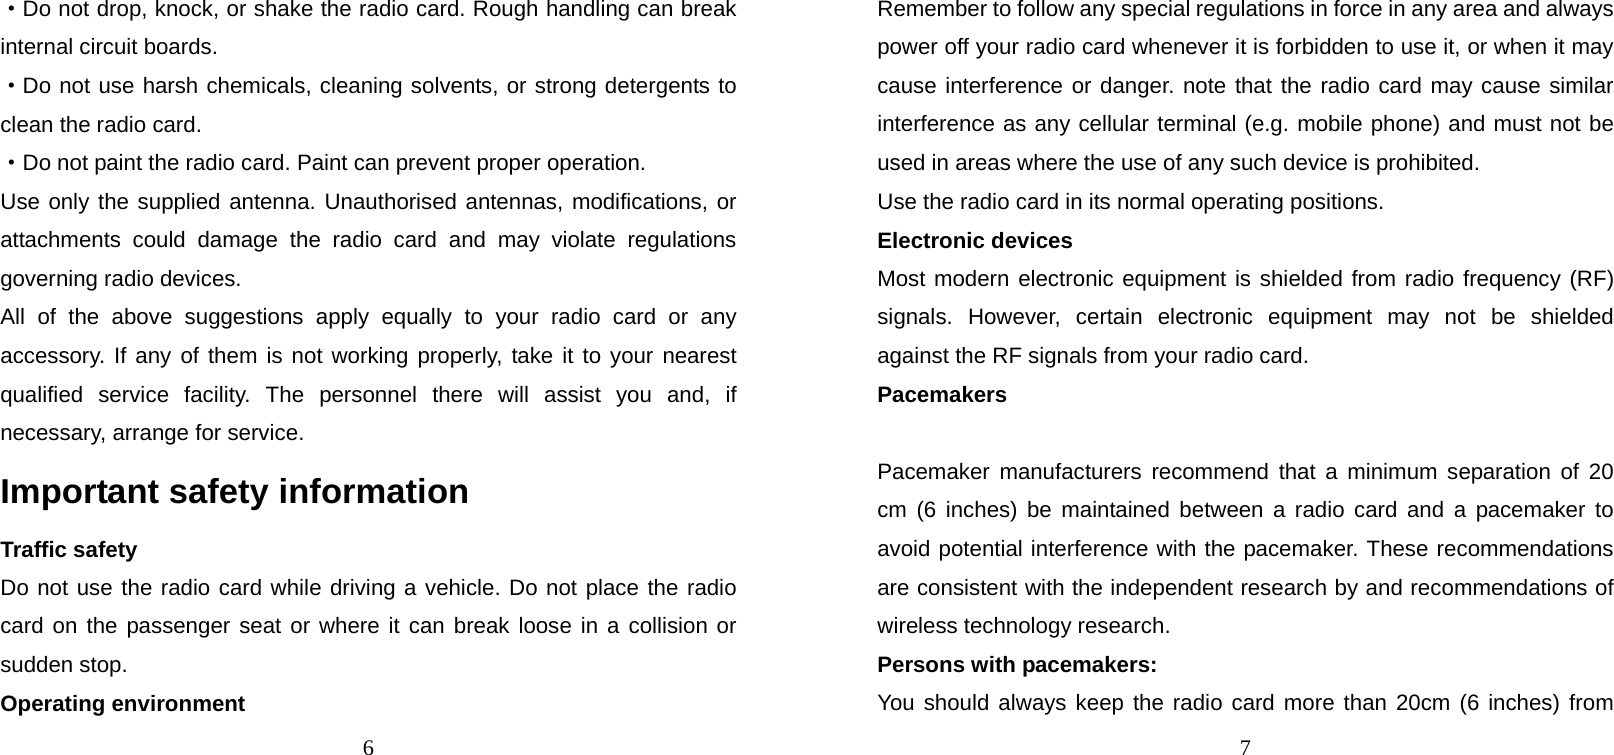 6 ·Do not drop, knock, or shake the radio card. Rough handling can break internal circuit boards. ·Do not use harsh chemicals, cleaning solvents, or strong detergents to clean the radio card. ·Do not paint the radio card. Paint can prevent proper operation. Use only the supplied antenna. Unauthorised antennas, modifications, or attachments could damage the radio card and may violate regulations governing radio devices. All of the above suggestions apply equally to your radio card or any accessory. If any of them is not working properly, take it to your nearest qualified service facility. The personnel there will assist you and, if necessary, arrange for service. Important safety information Traffic safety Do not use the radio card while driving a vehicle. Do not place the radio card on the passenger seat or where it can break loose in a collision or sudden stop. Operating environment 7 Remember to follow any special regulations in force in any area and always power off your radio card whenever it is forbidden to use it, or when it may cause interference or danger. note that the radio card may cause similar interference as any cellular terminal (e.g. mobile phone) and must not be used in areas where the use of any such device is prohibited. Use the radio card in its normal operating positions. Electronic devices Most modern electronic equipment is shielded from radio frequency (RF) signals. However, certain electronic equipment may not be shielded against the RF signals from your radio card. Pacemakers  Pacemaker manufacturers recommend that a minimum separation of 20 cm (6 inches) be maintained between a radio card and a pacemaker to avoid potential interference with the pacemaker. These recommendations are consistent with the independent research by and recommendations of wireless technology research. Persons with pacemakers: You should always keep the radio card more than 20cm (6 inches) from 